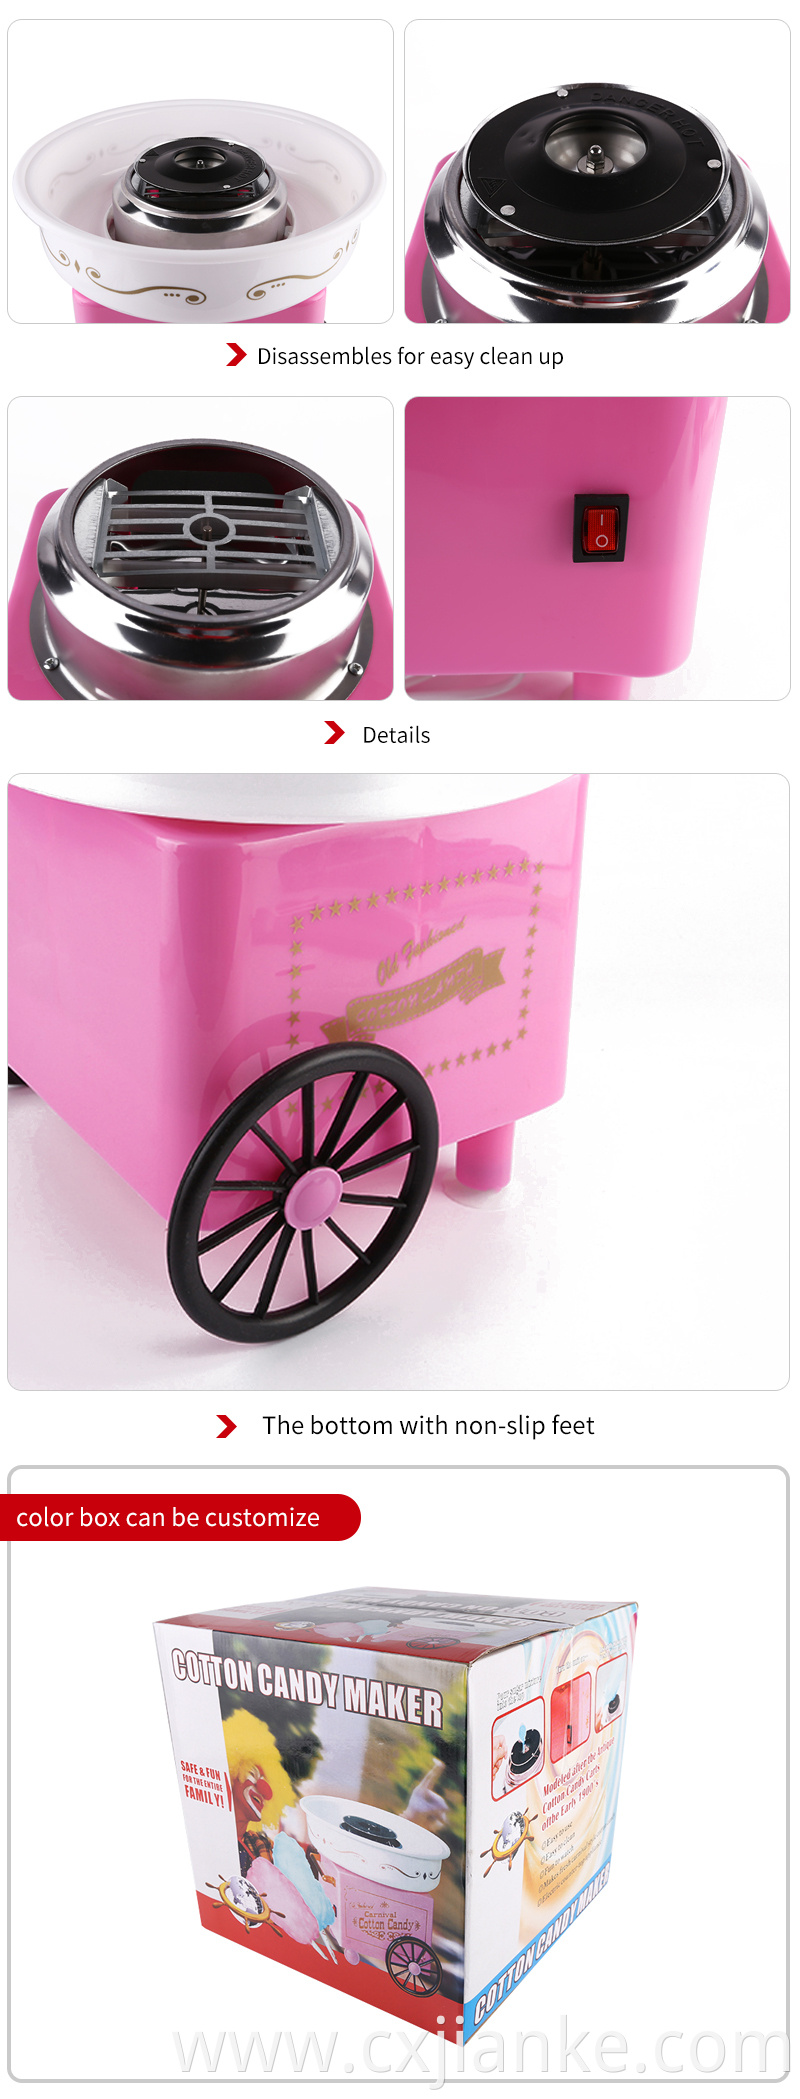 High Quality retro cotton candy maker for home with good price